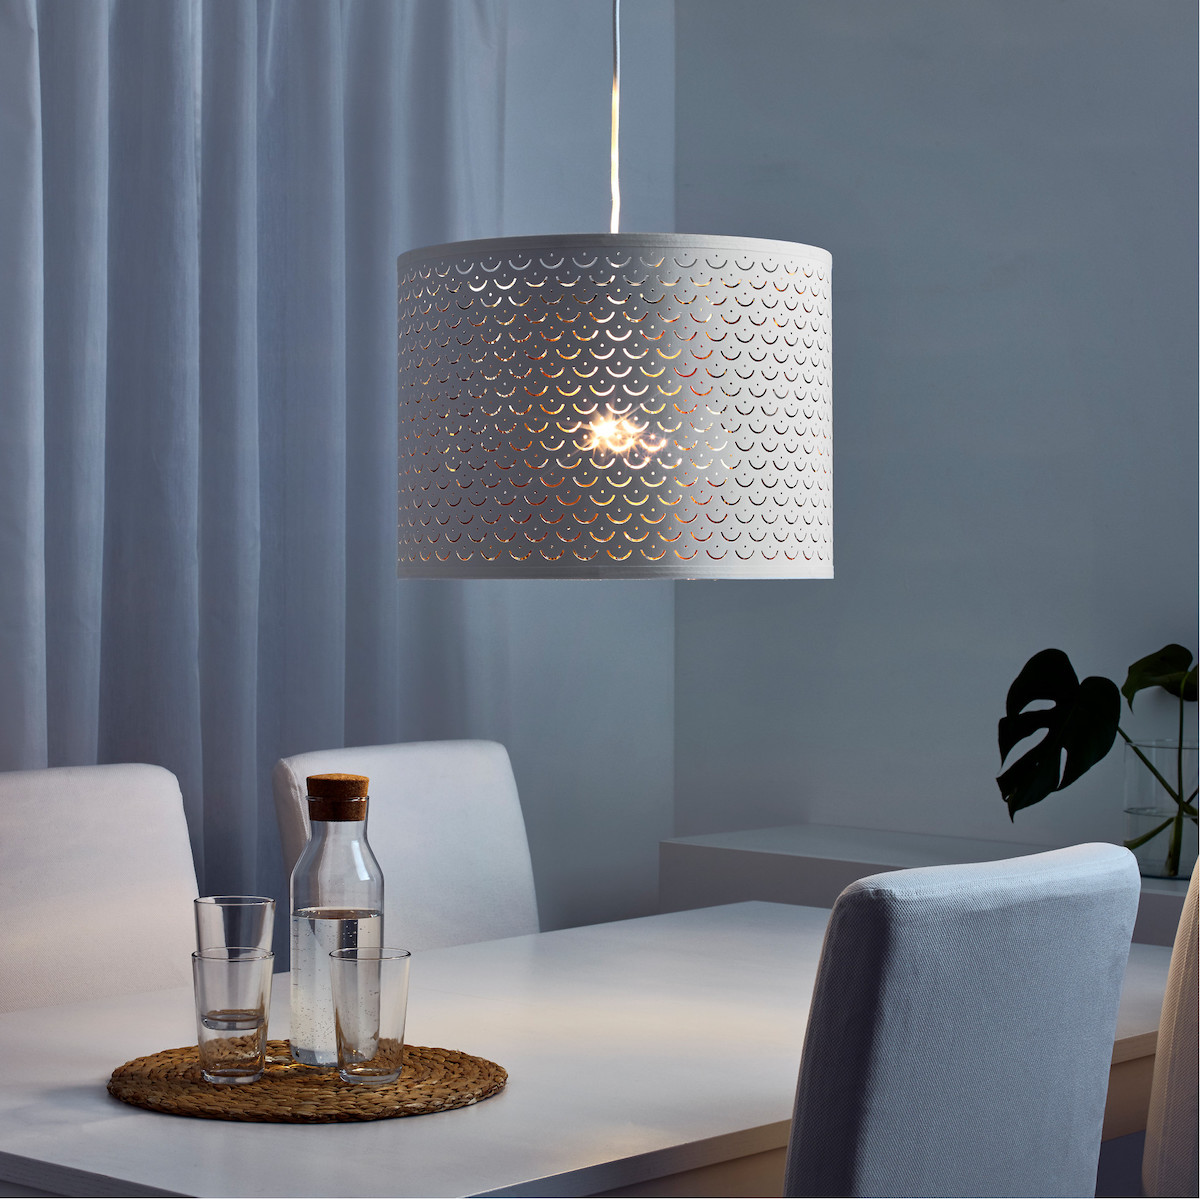 IKEA NYMÖ Lamp Shade in white hanging over a dining table.